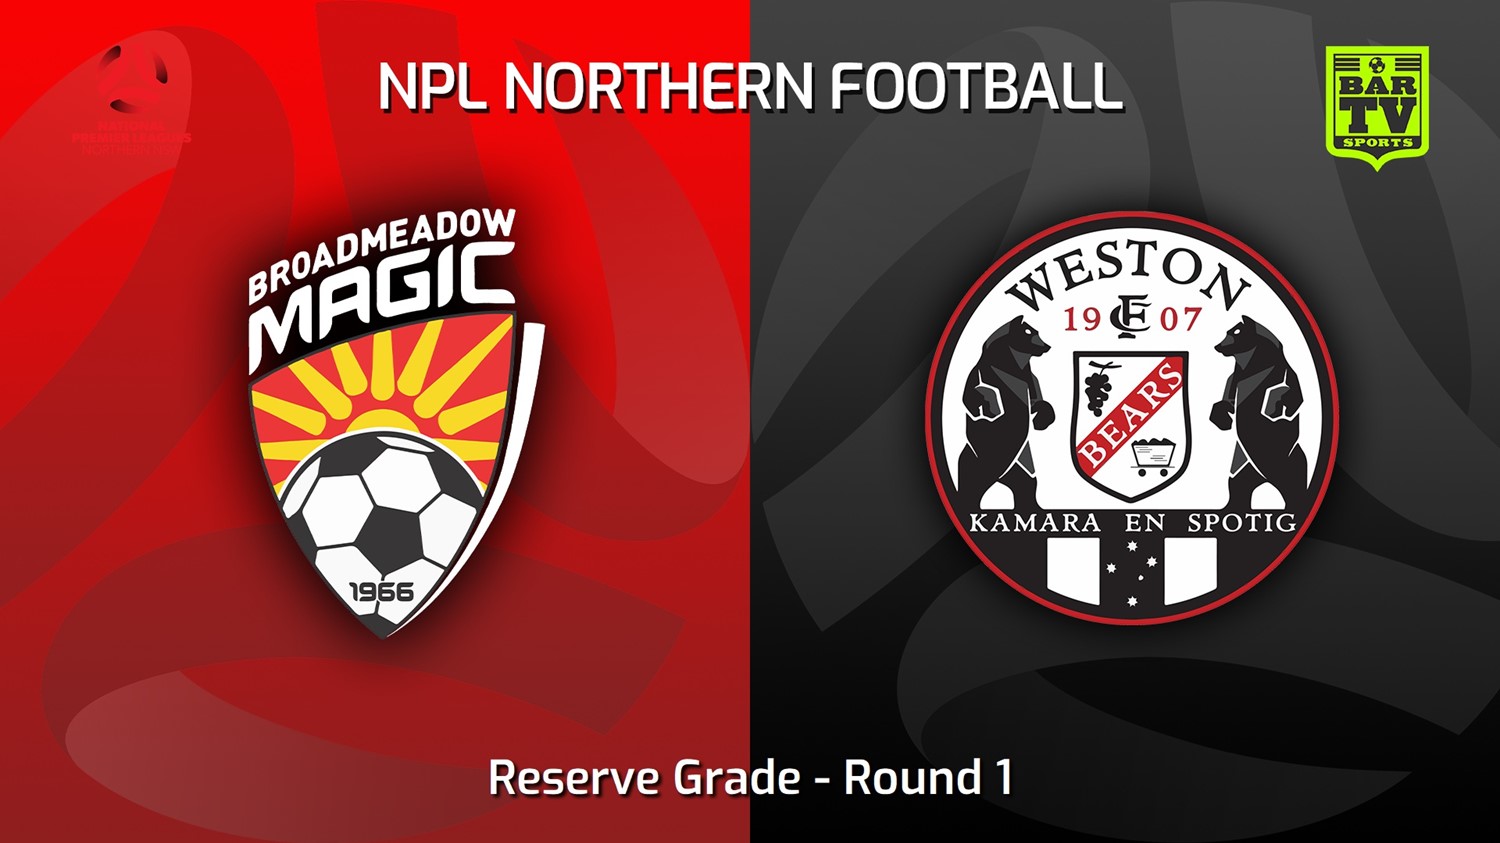 230303-NNSW NPLM Res Round 1 - Broadmeadow Magic Res v Weston Workers FC Res Minigame Slate Image